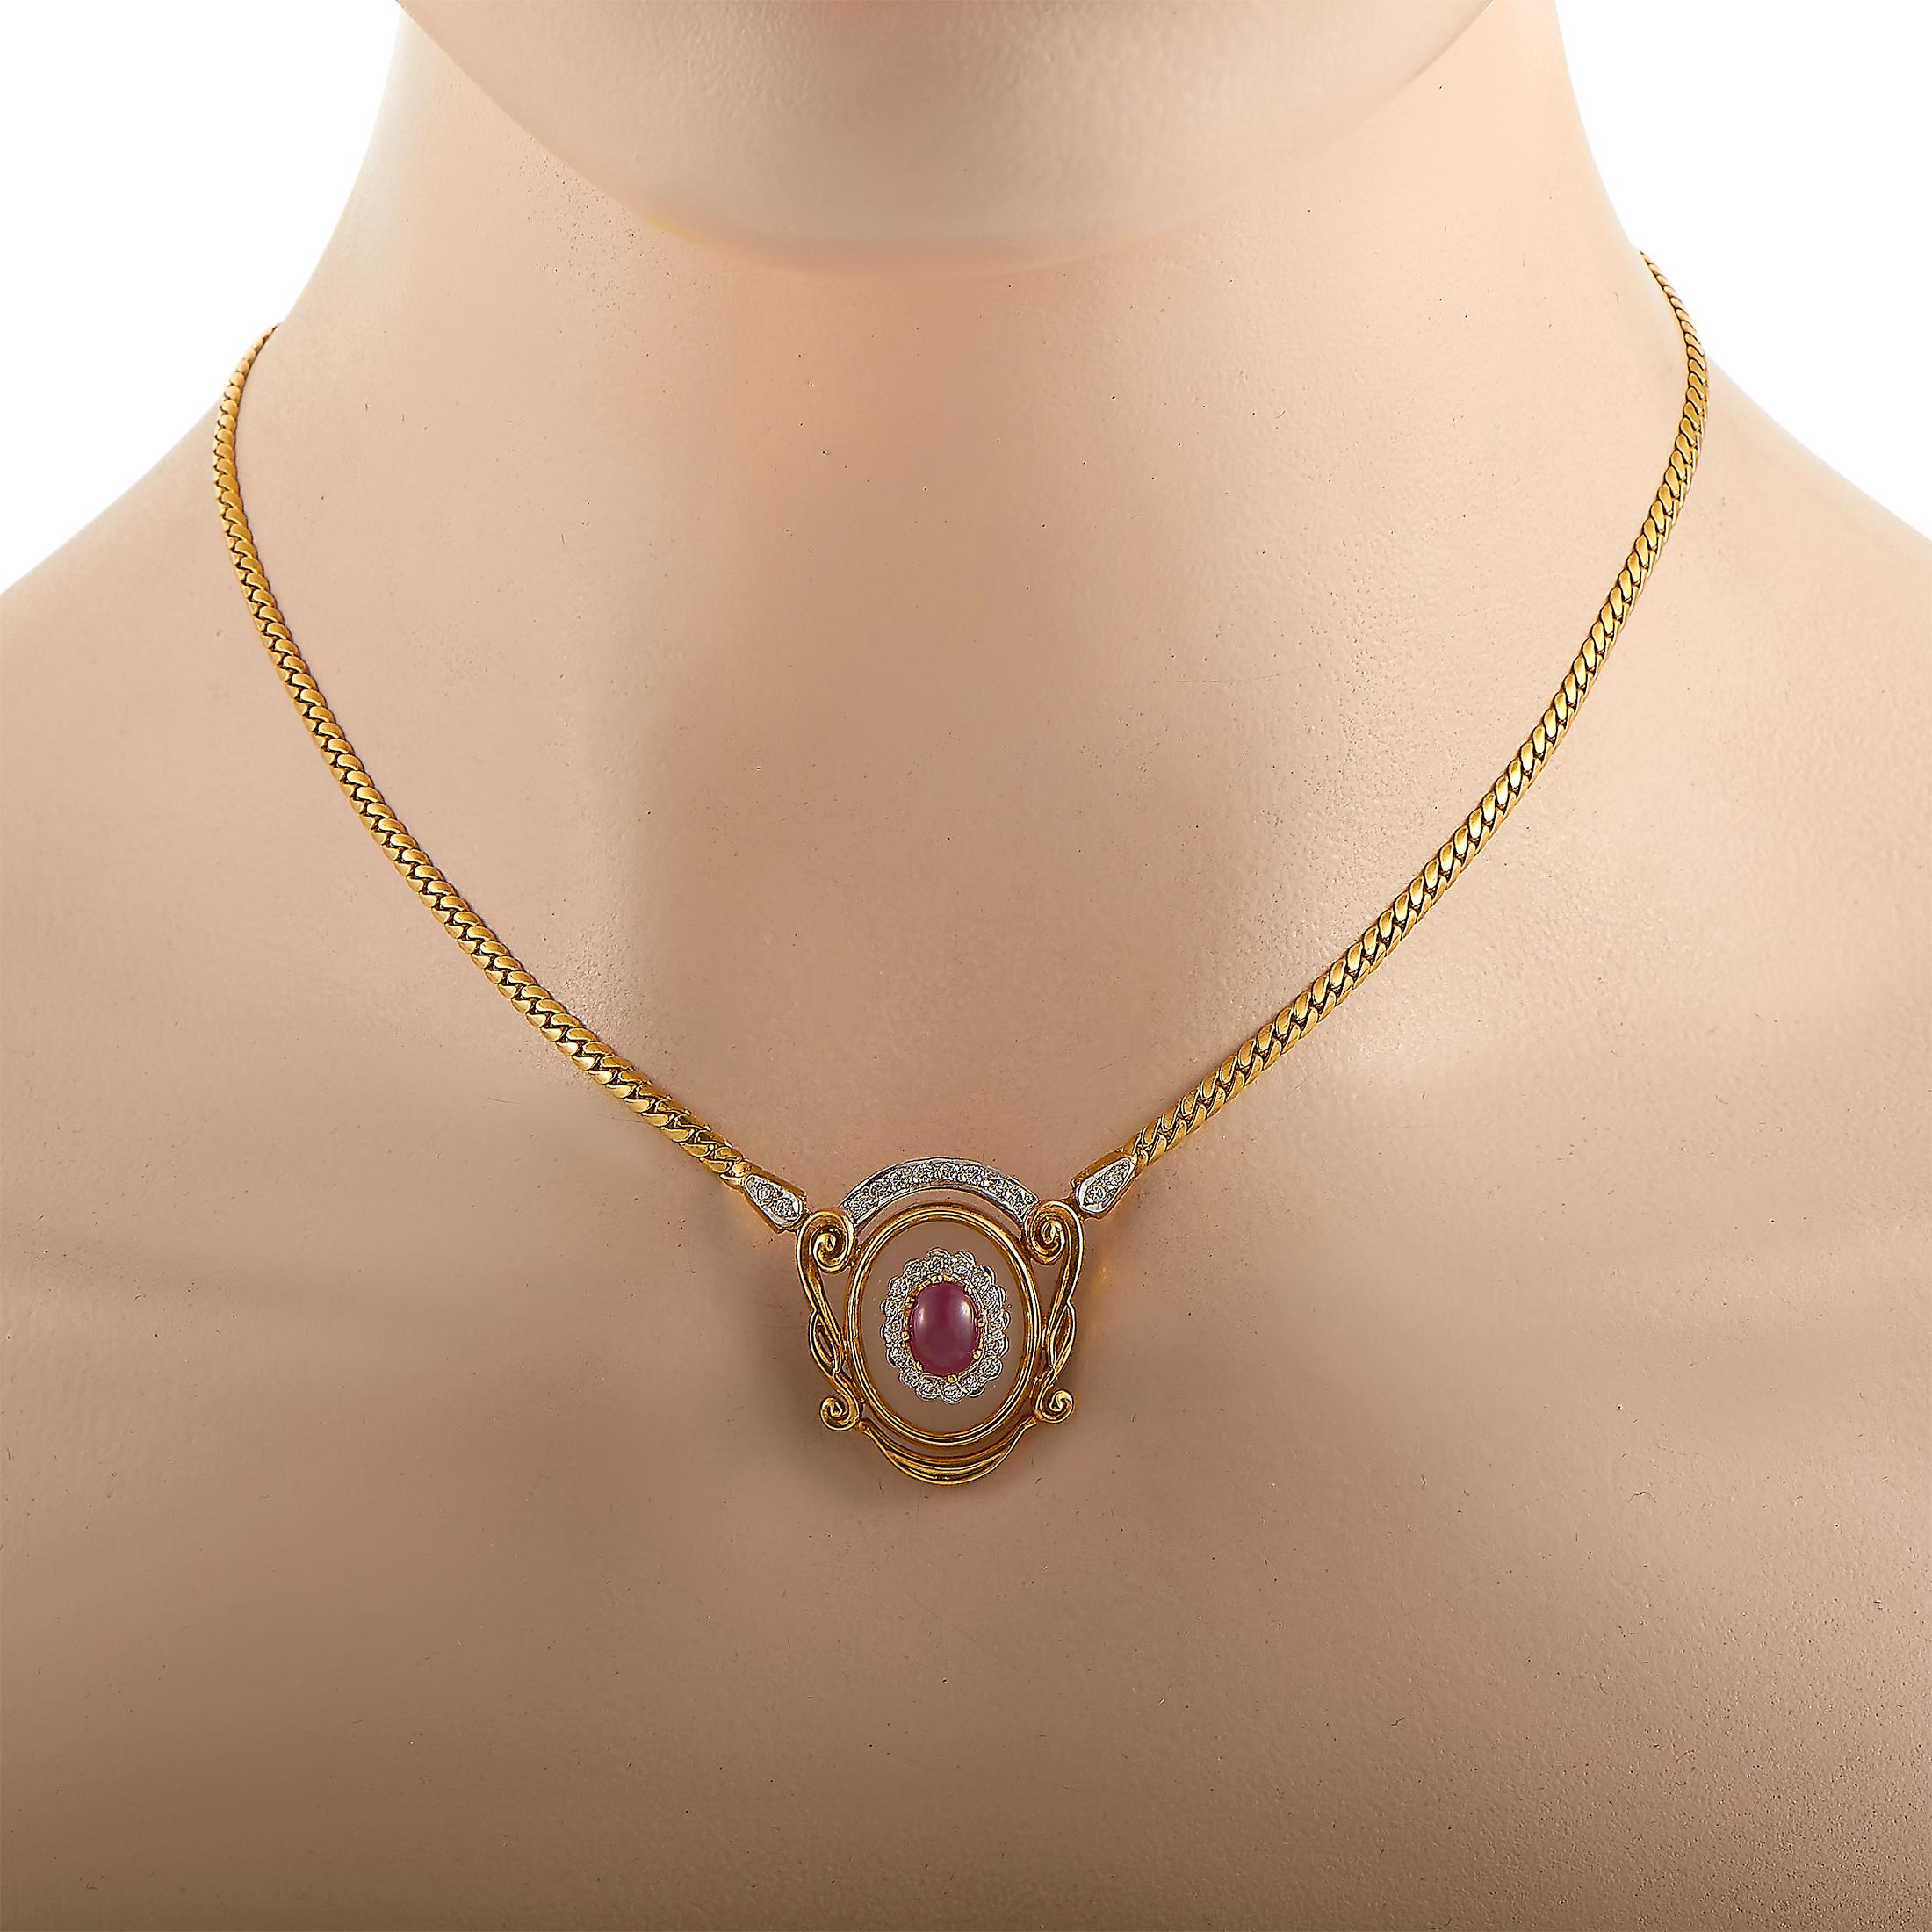 This Ilias Lalaounis necklace is crafted from 18K yellow gold and set with crystal, a 1.30 ct ruby, and a total of 0.50 carats of diamonds. The necklace weighs 22.6 grams and is presented with a 15” chain and a pendant that measures 1” in length and